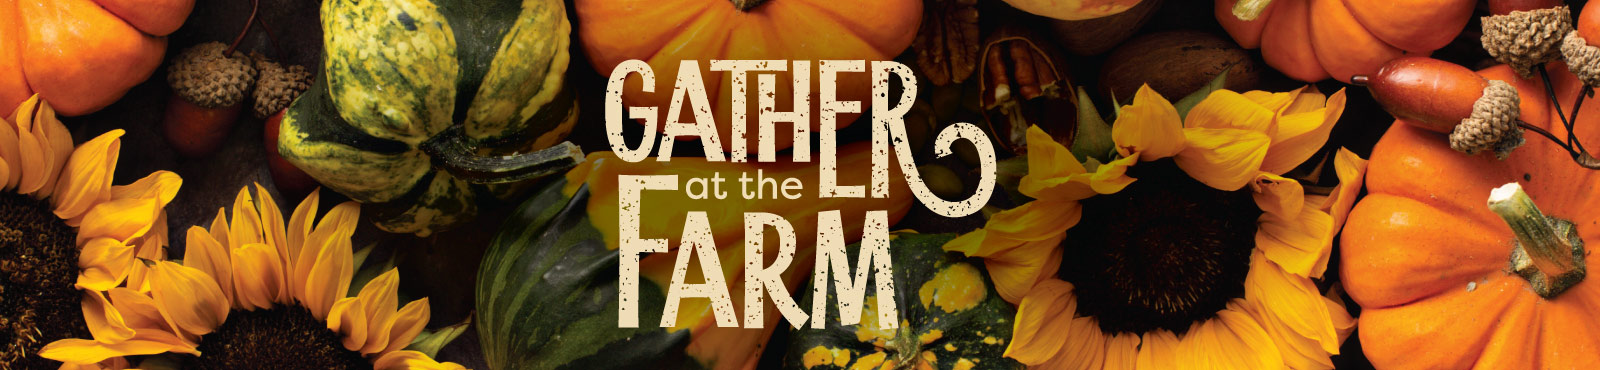 Pumpkins, gourds and sunflower background with Gather at the Farm wording overlay